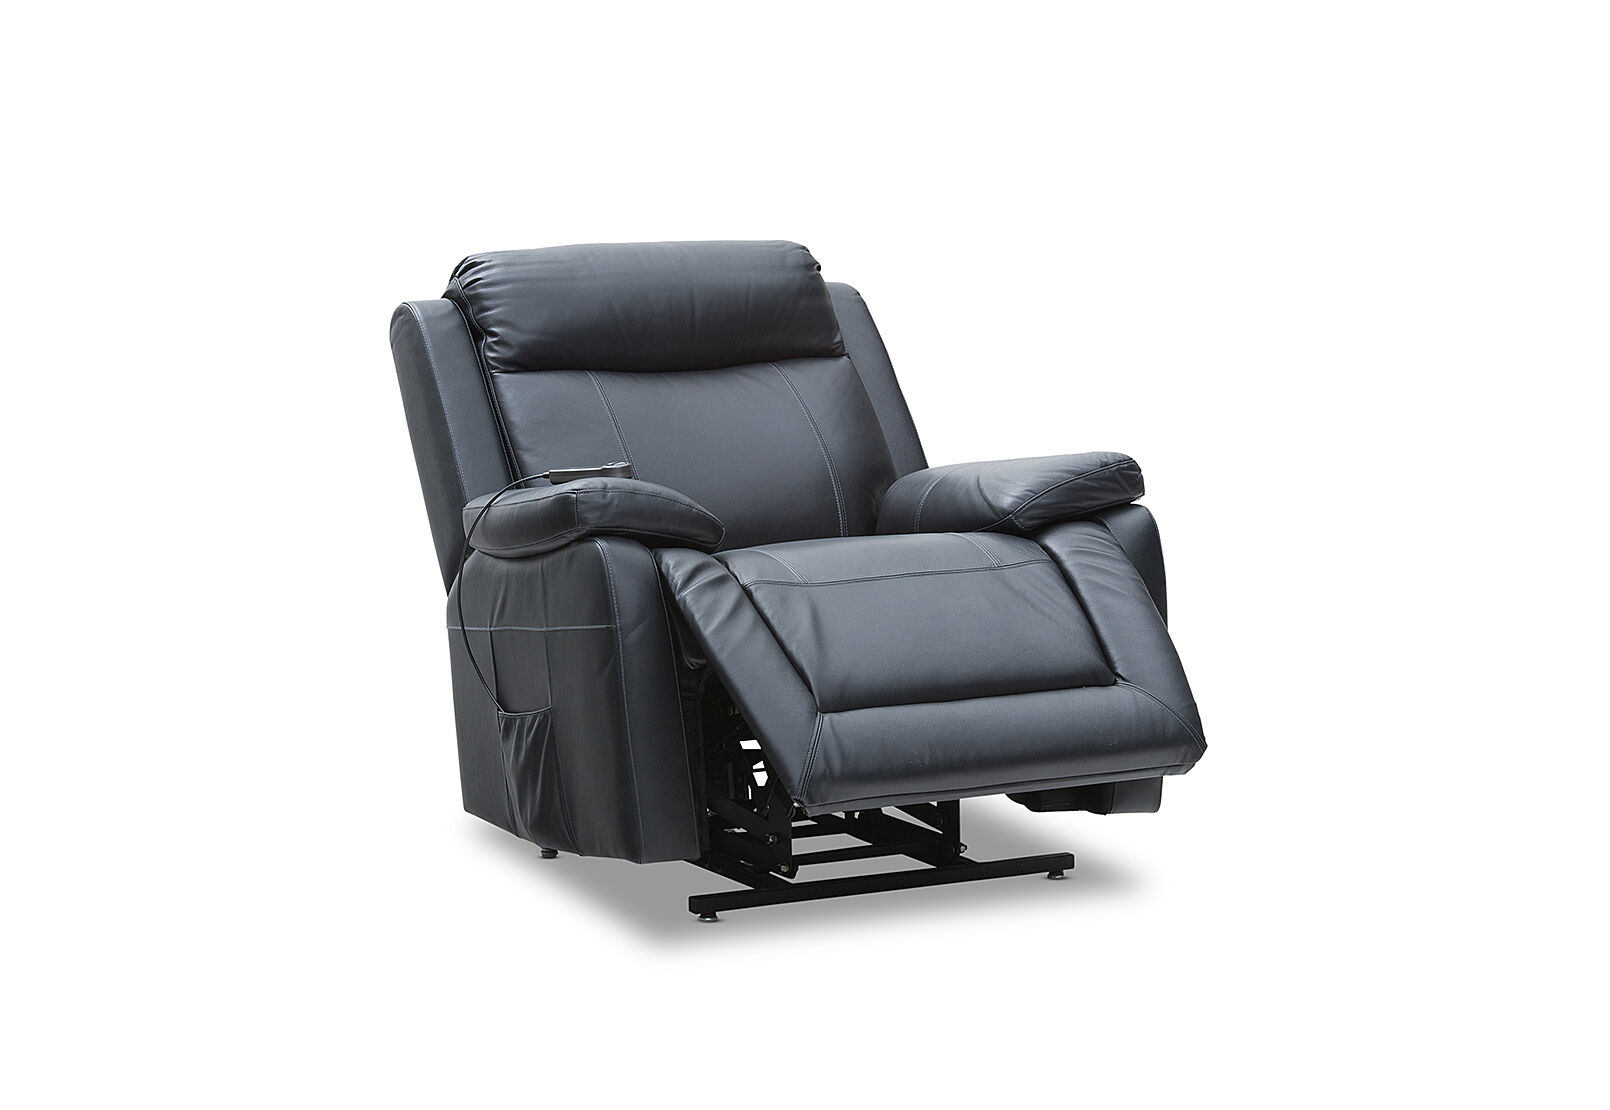 black san marco leather electric lift chair  amart furniture